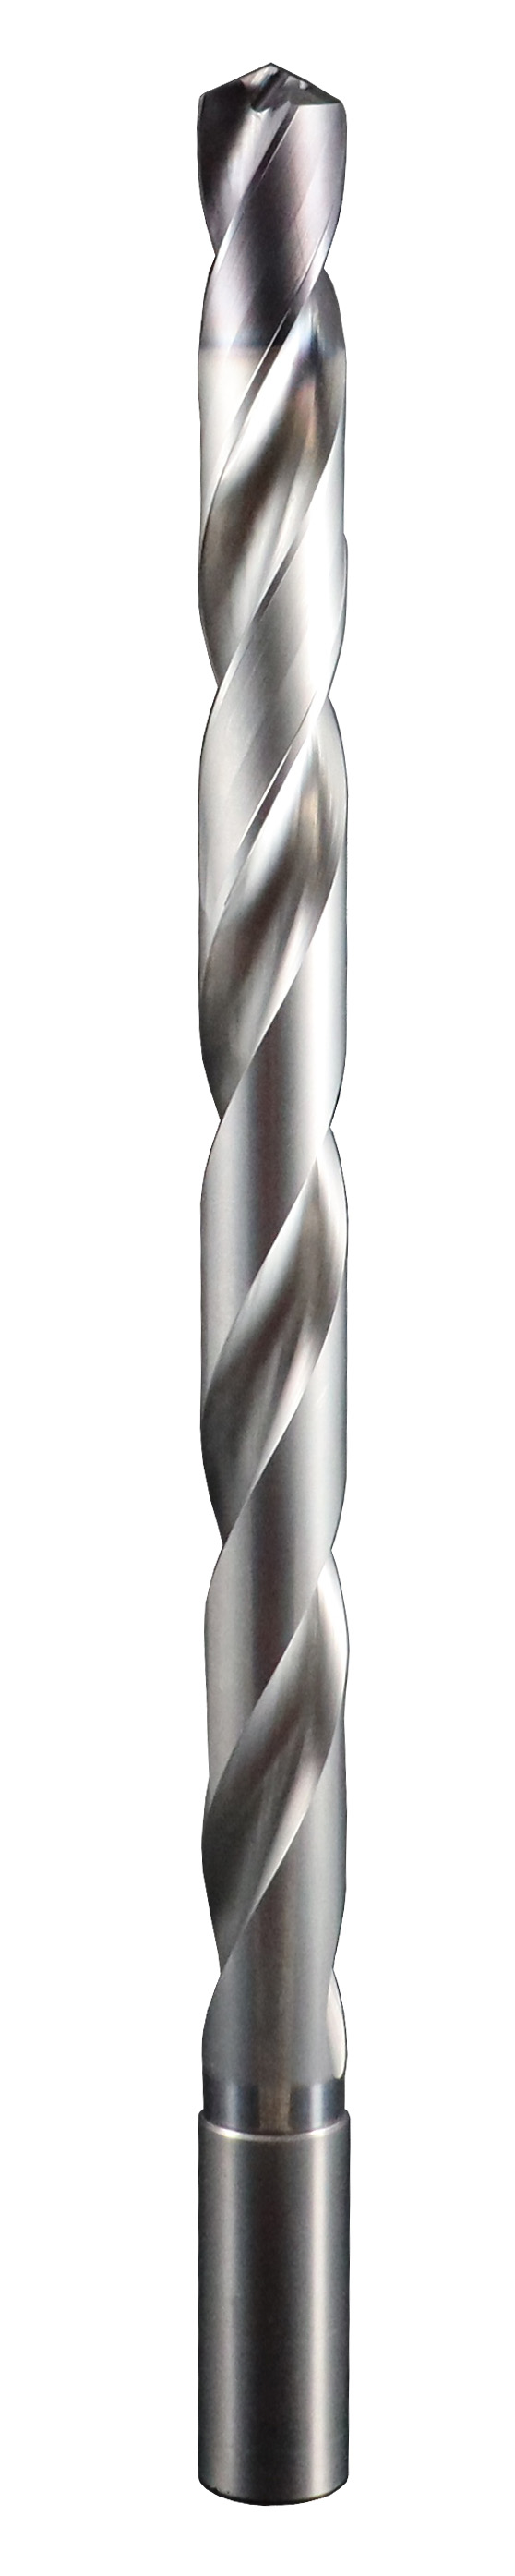 3.60mm Dia, 137 Degree Point, Solid Carbide Drill - 66715